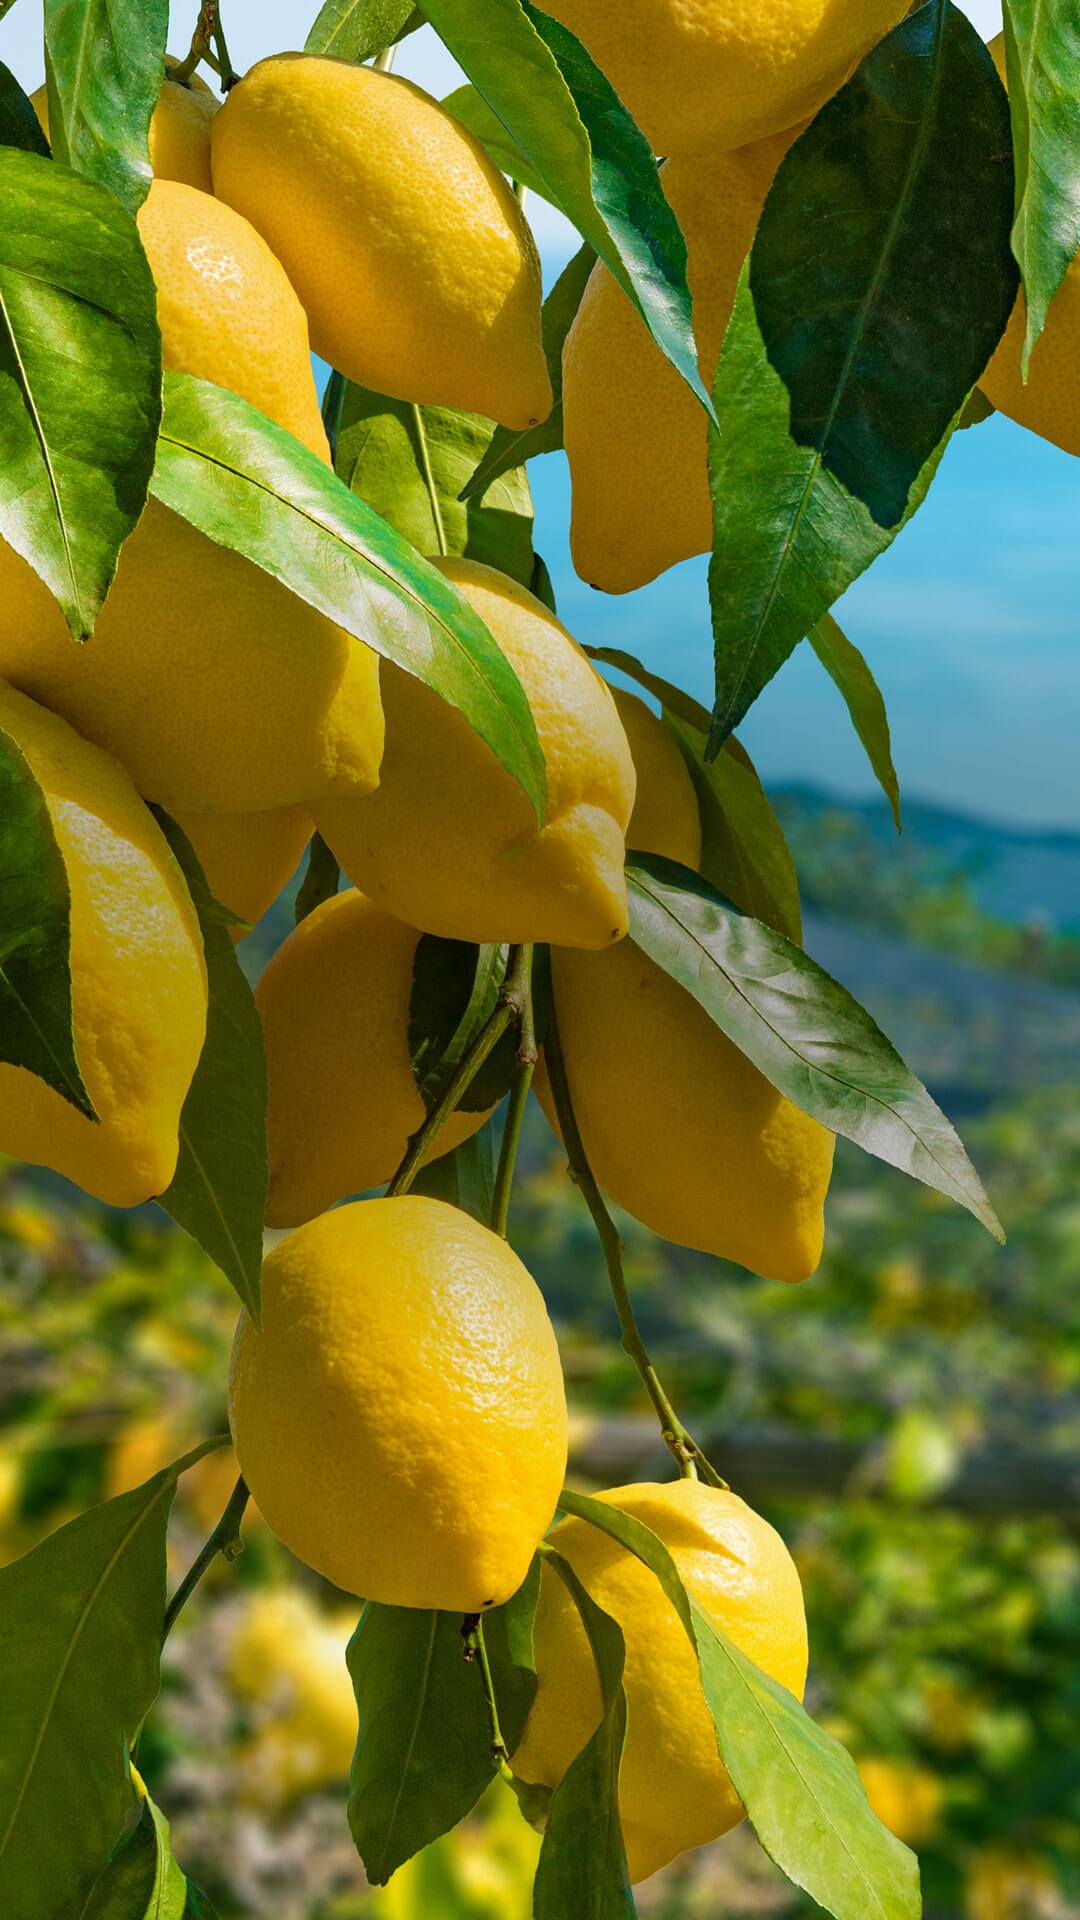 Portrait of bunches of lemons in a lemon orchard 